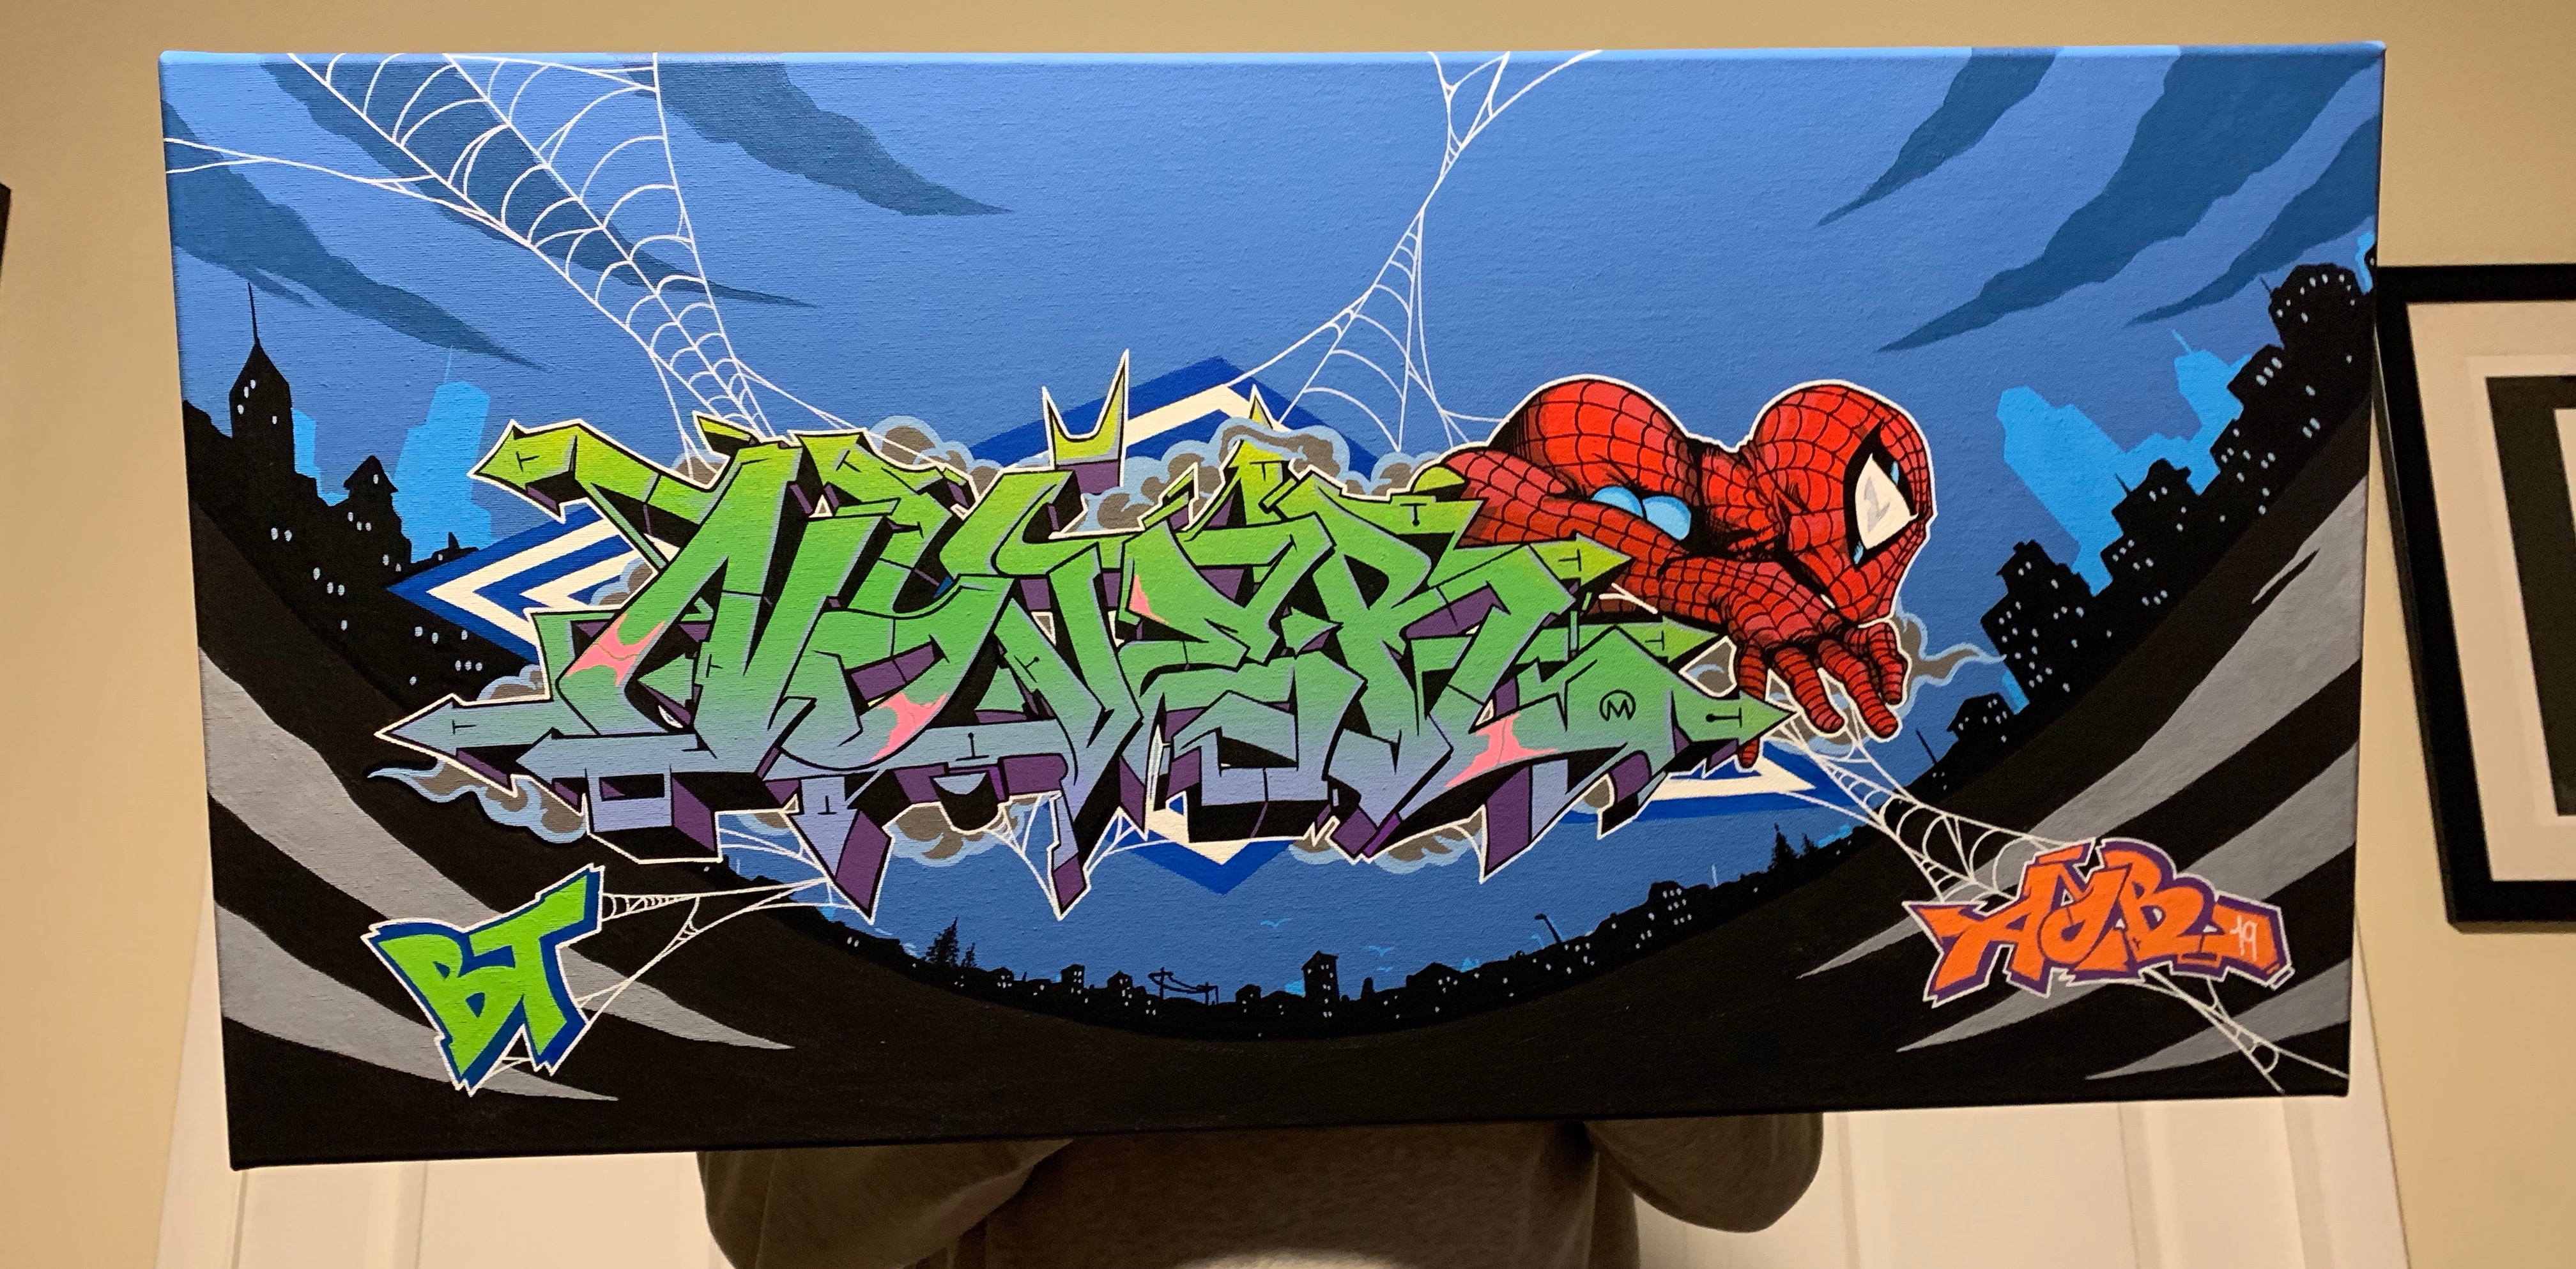 Spider-Man x Nover on 36 x 48' Canvas, Paint and Markers. 2019.